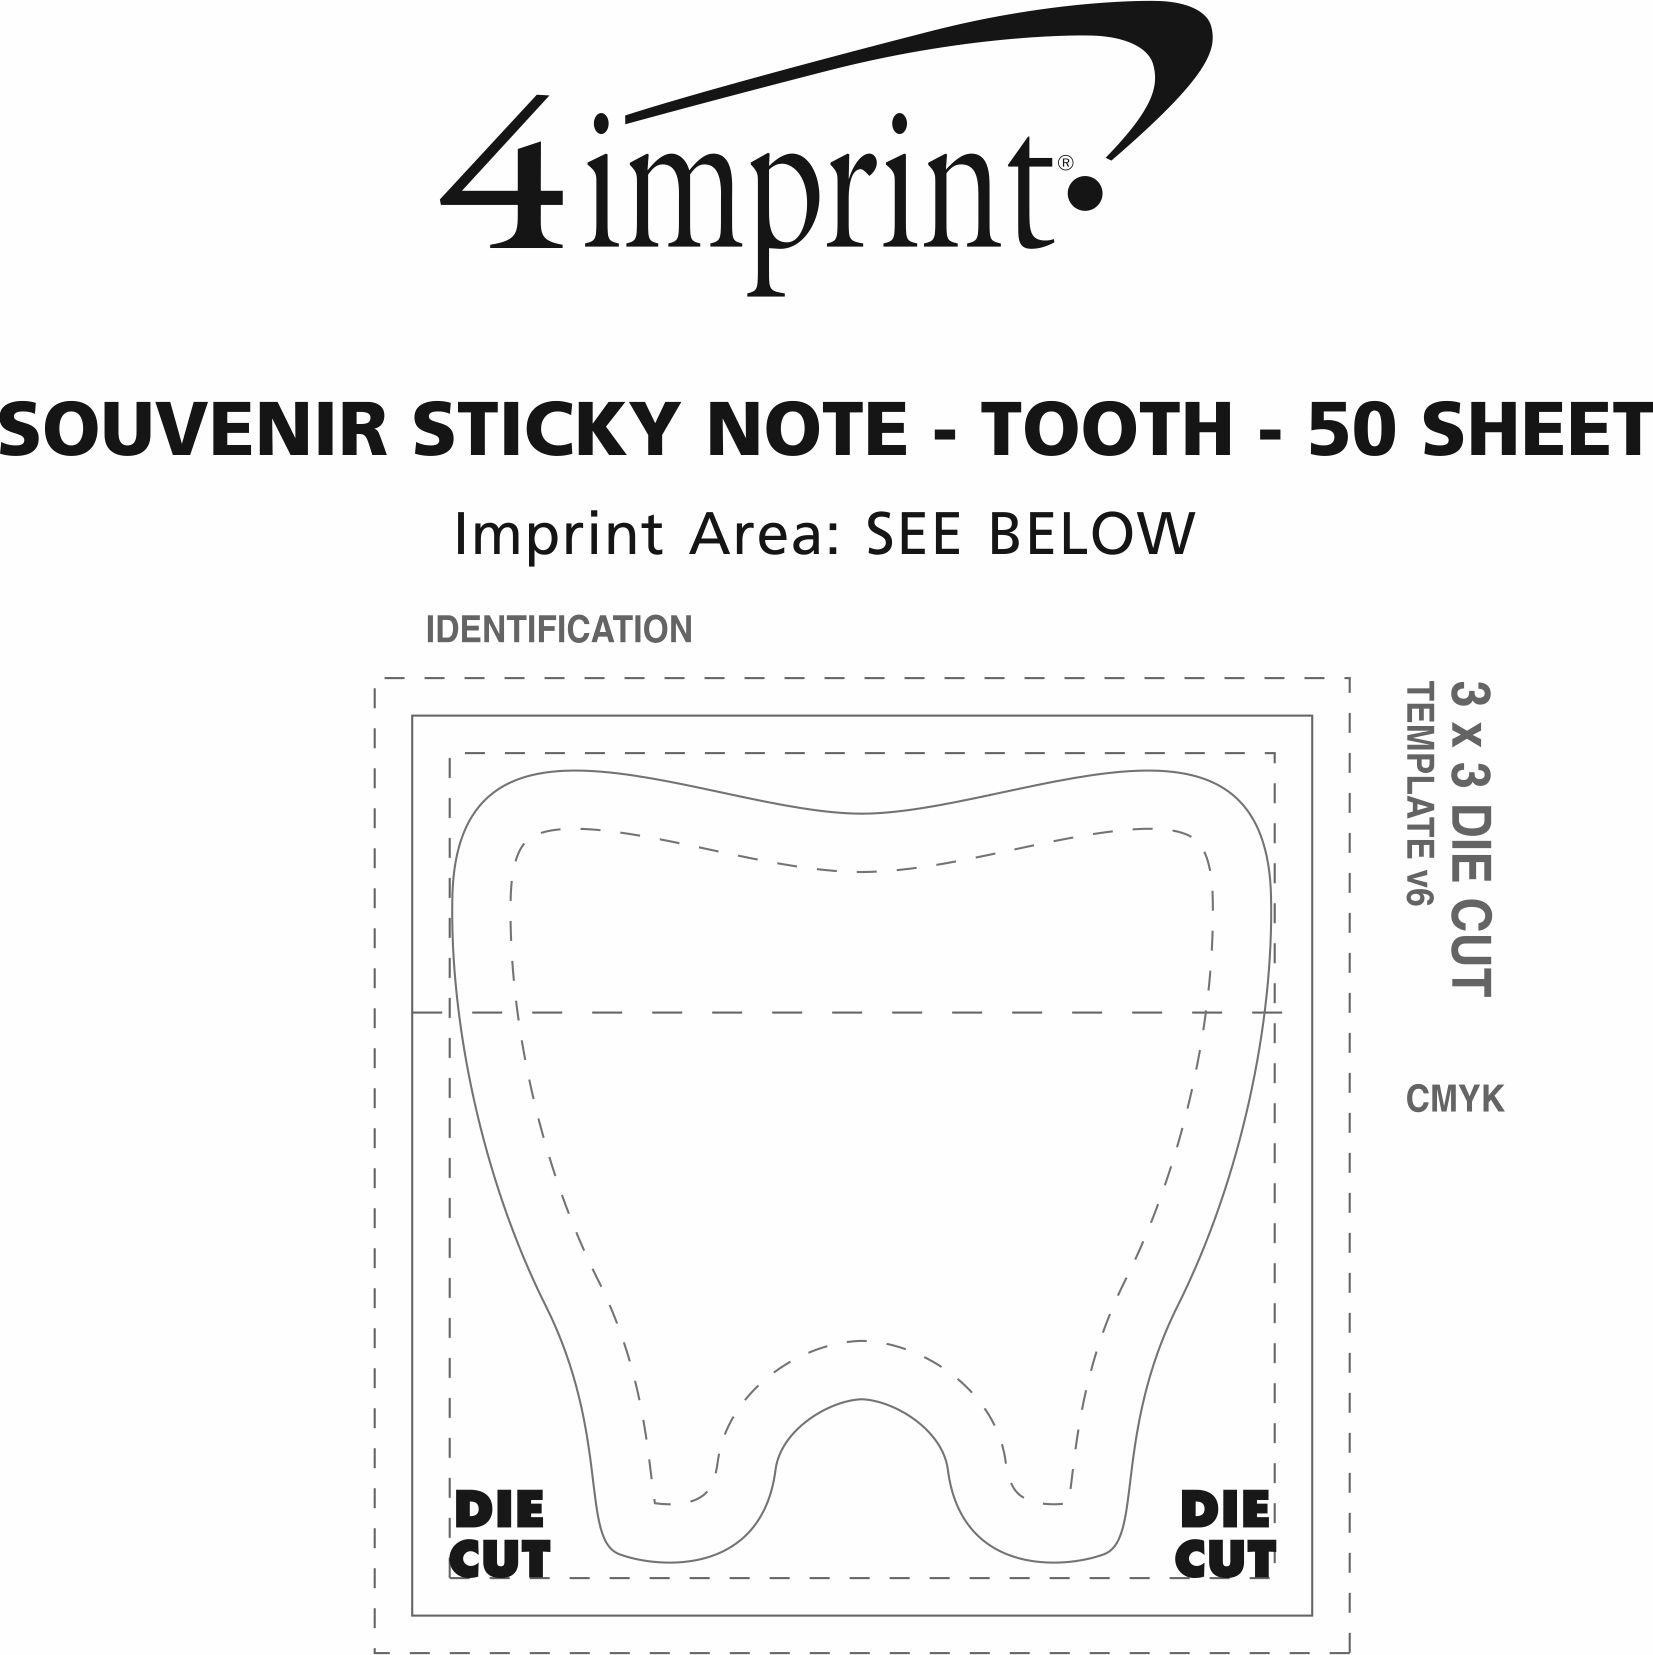 Imprint Area of Souvenir Sticky Note - Tooth - 50 Sheet